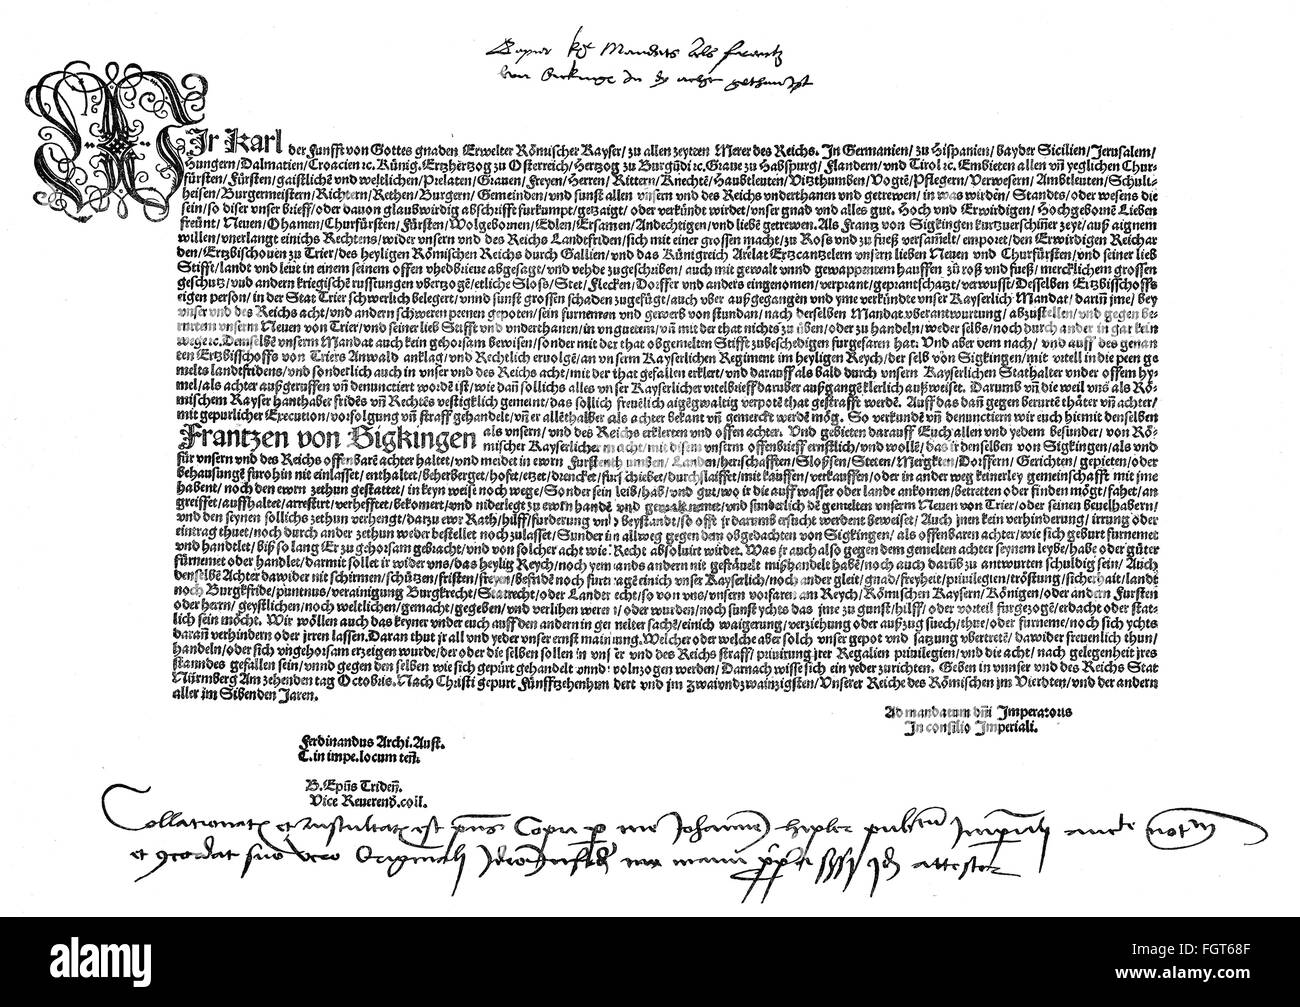 Knights' Revolt 1522 - 1523, ban letter against Franz von Sickingen, remitted in the name of Emperor Charles V by Archduke Ferdinand of Austria, 10.10.1522, Imperial ban, documents, document, letter, letters, Palatinate knight uprising, uprising, rising, uprisings, imperial knight, Germany, Holy Roman Empire, HRE, 16th century, nobody, remit, remitting, name, names, emperor, emperors, historic, historical, Additional-Rights-Clearences-Not Available Stock Photo